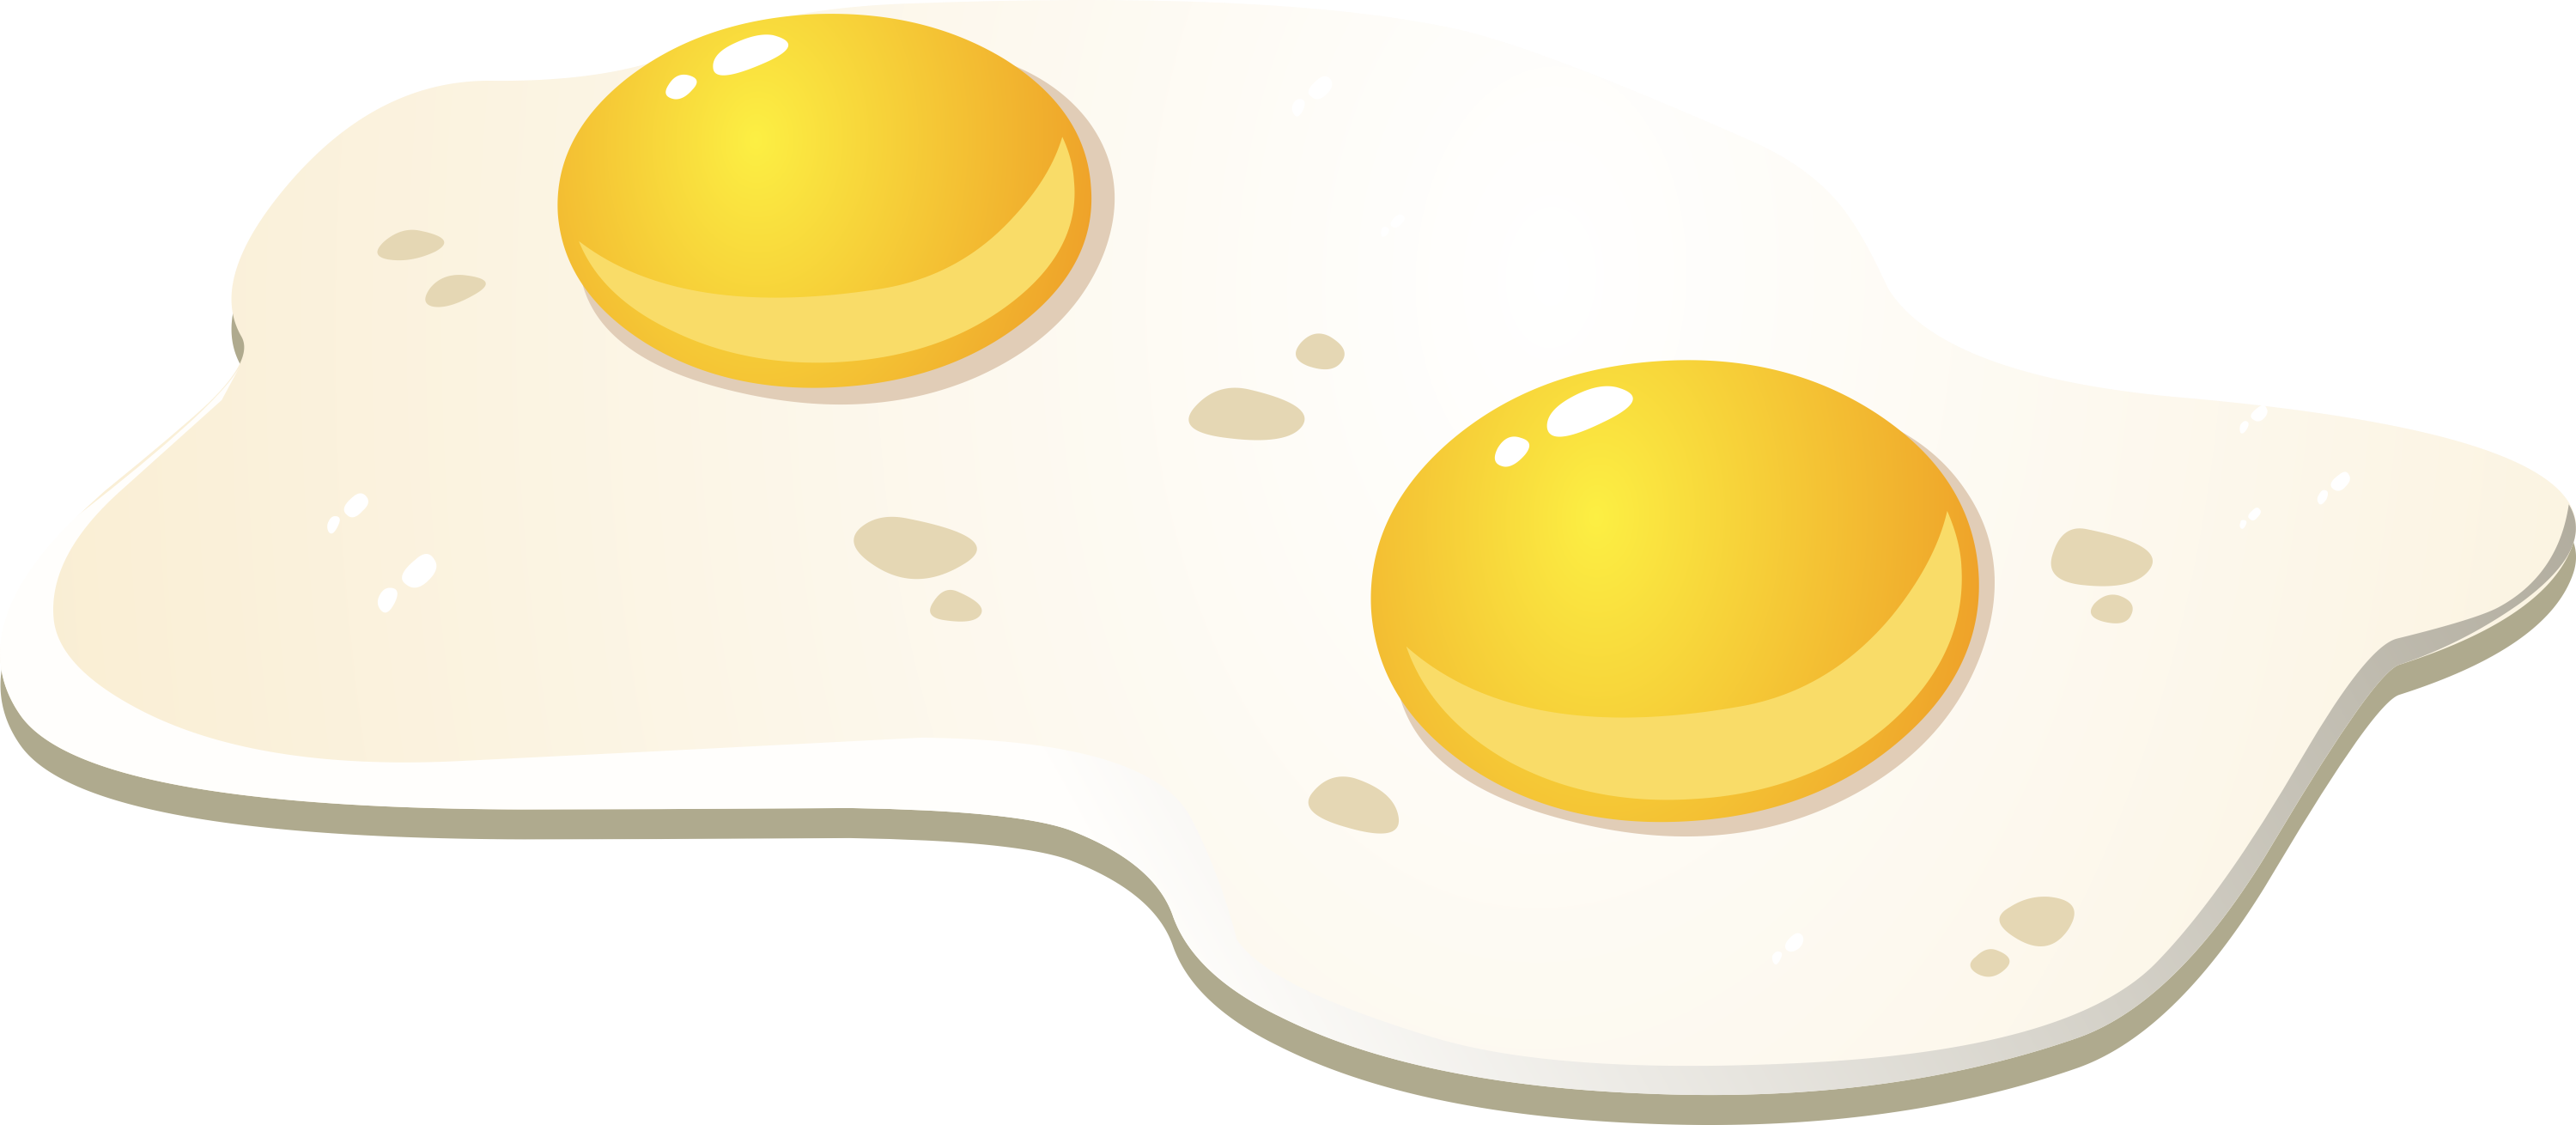 Pin Fried Egg Clipart Transparent #11 - Fry Egg, Transparent background PNG HD thumbnail